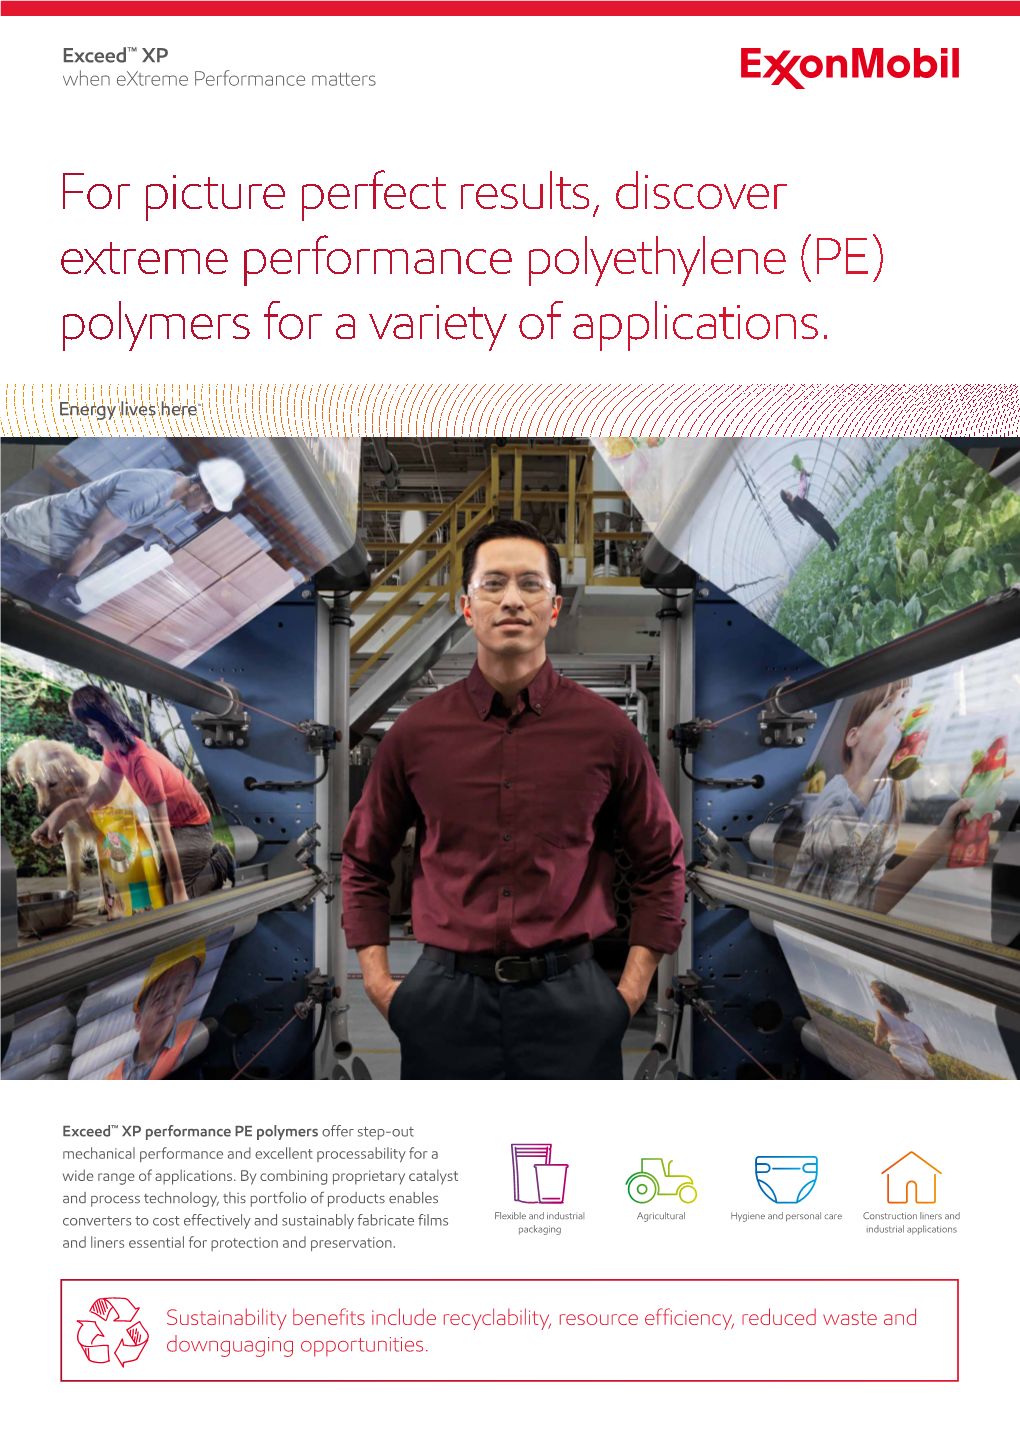 For Picture Perfect Results, Discover Extreme Performance Polyethylene (PE) Polymers for a Variety of Applications